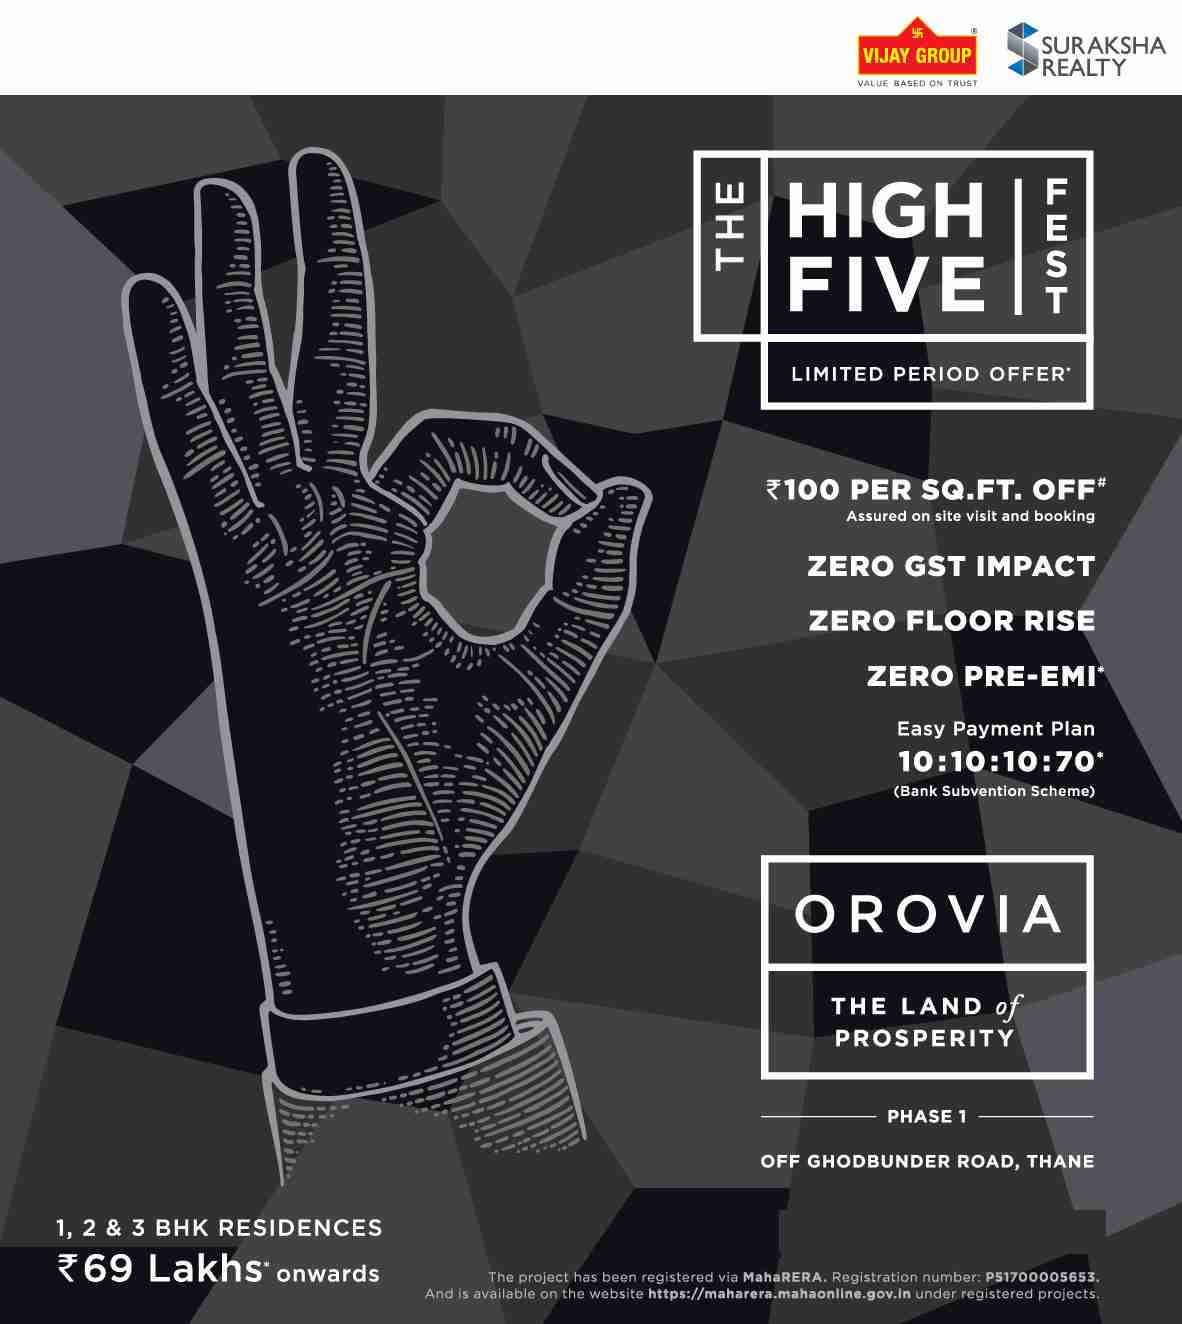 Book home during The High Five Fest offer at Vijay Orovia in Mumbai Update